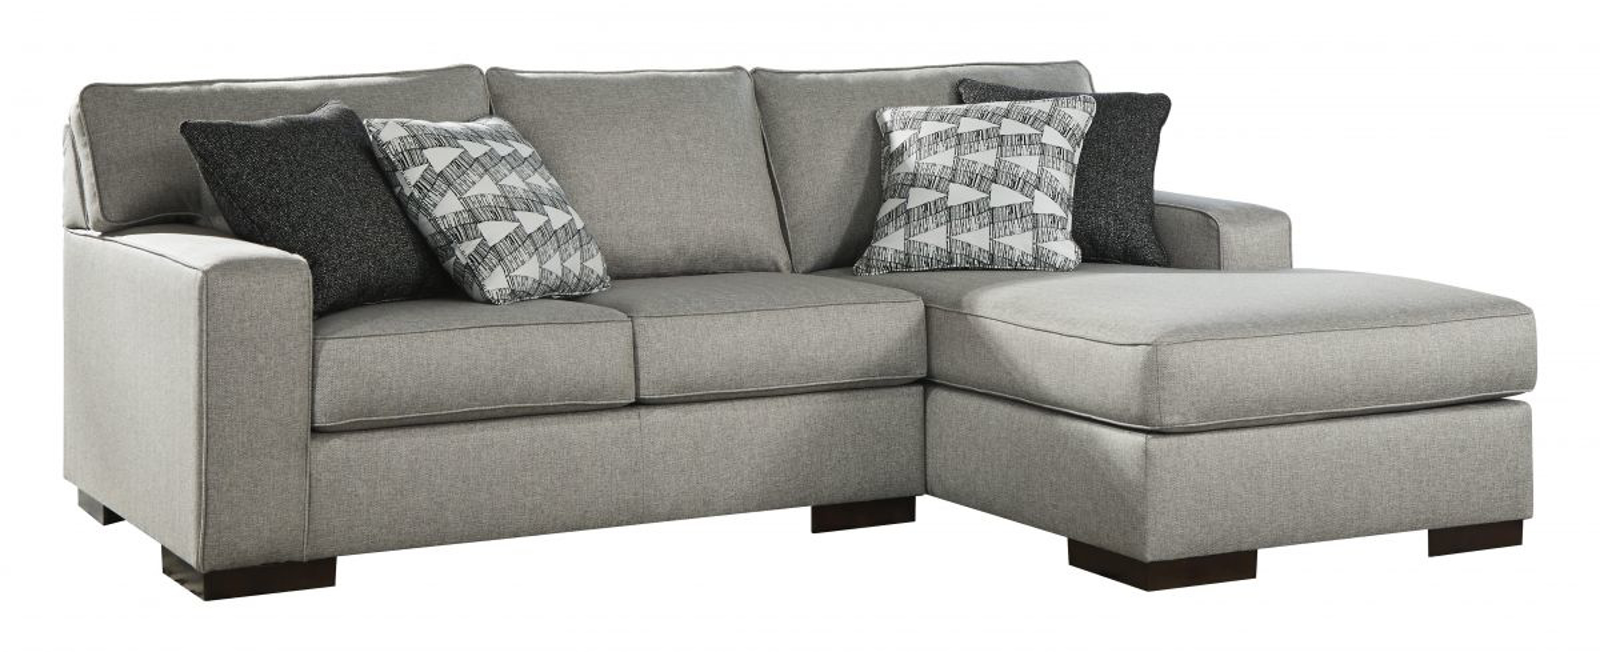 Picture of Marsing Nuvella Sectional